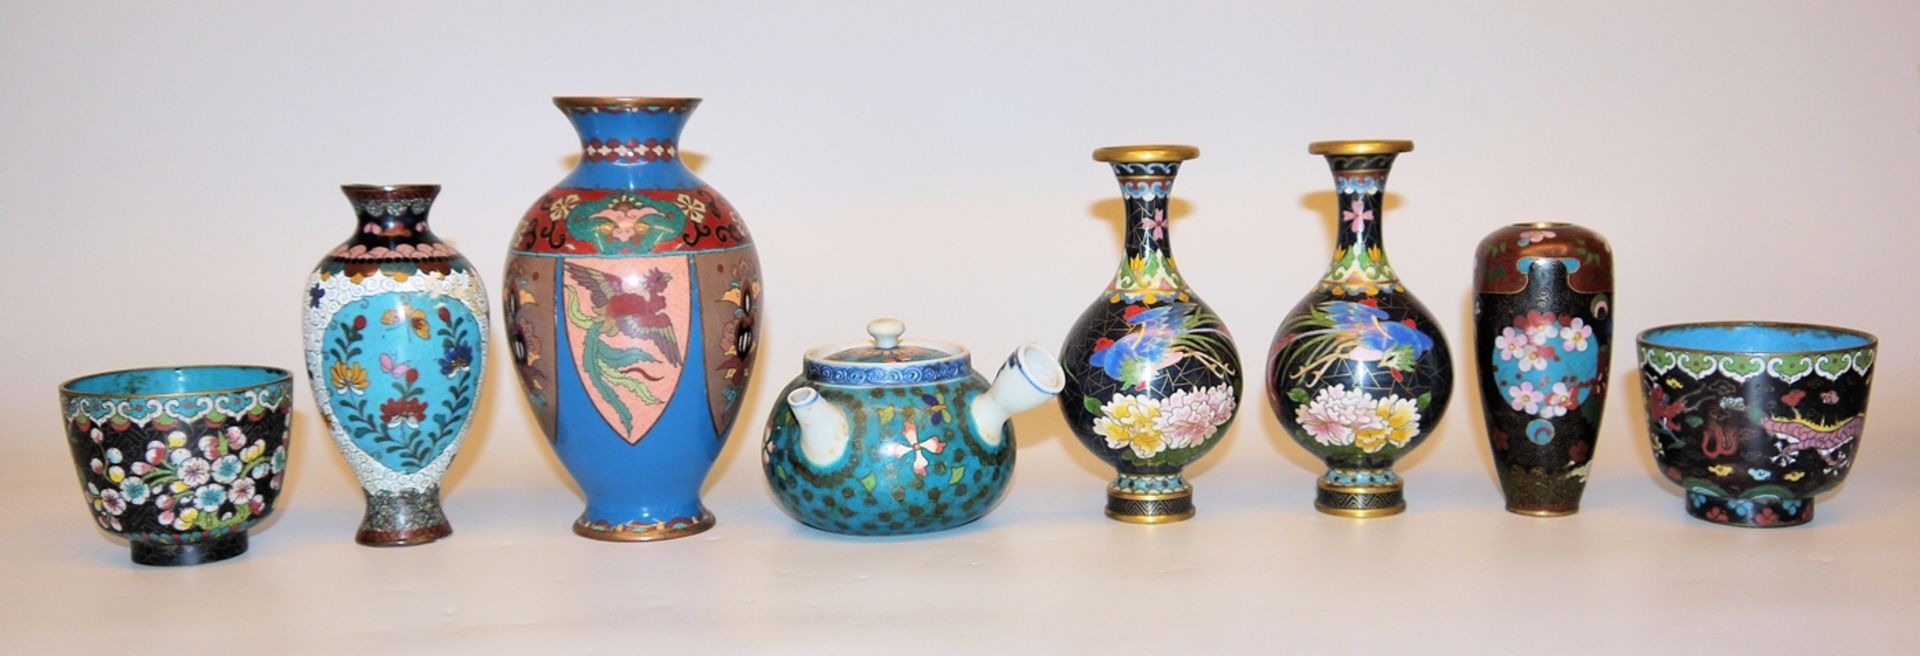 Teapot in "totai shippo" and seven cloisonné vessels from the Japanese Meiji period around 1900